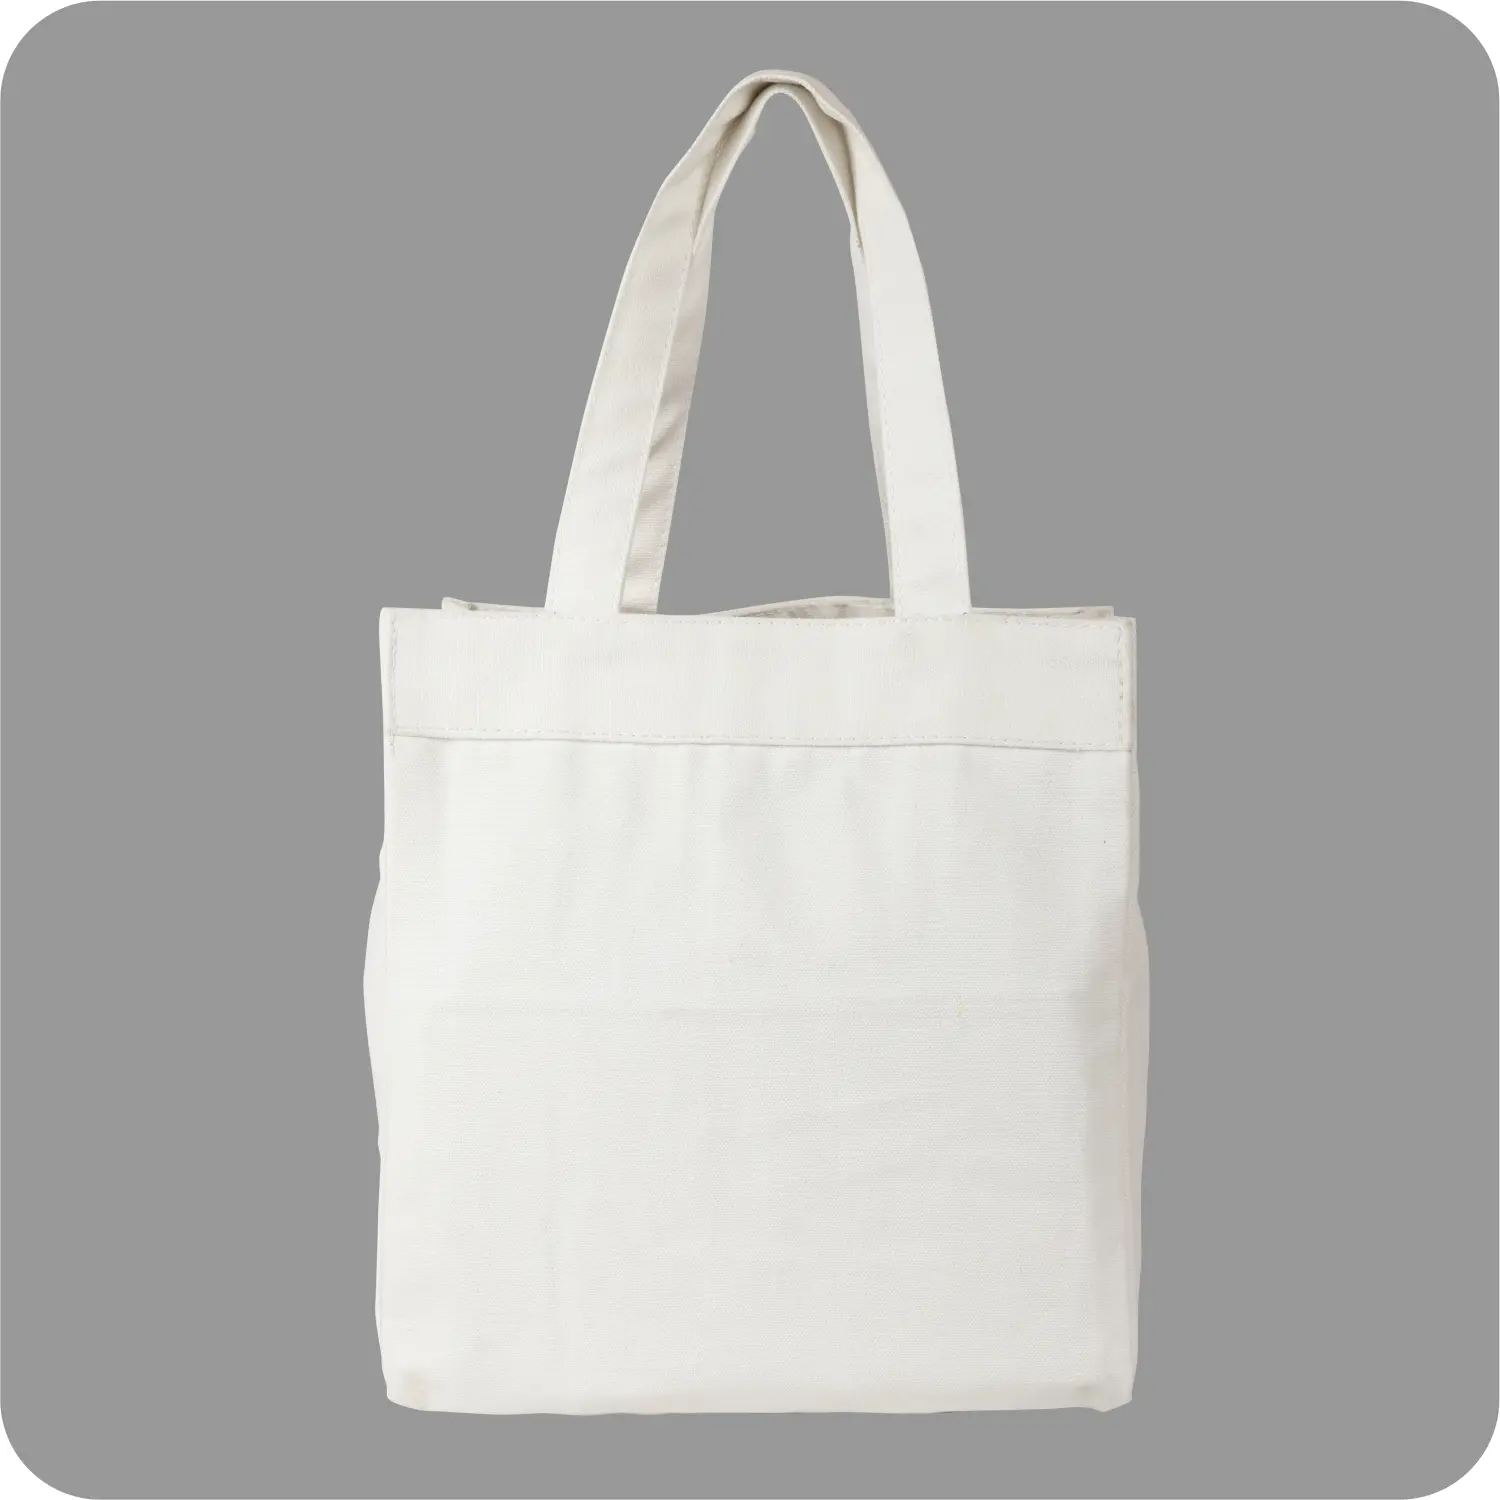 Light weight, Pure Cotton Fabric Hand Canvas Lunch Bags